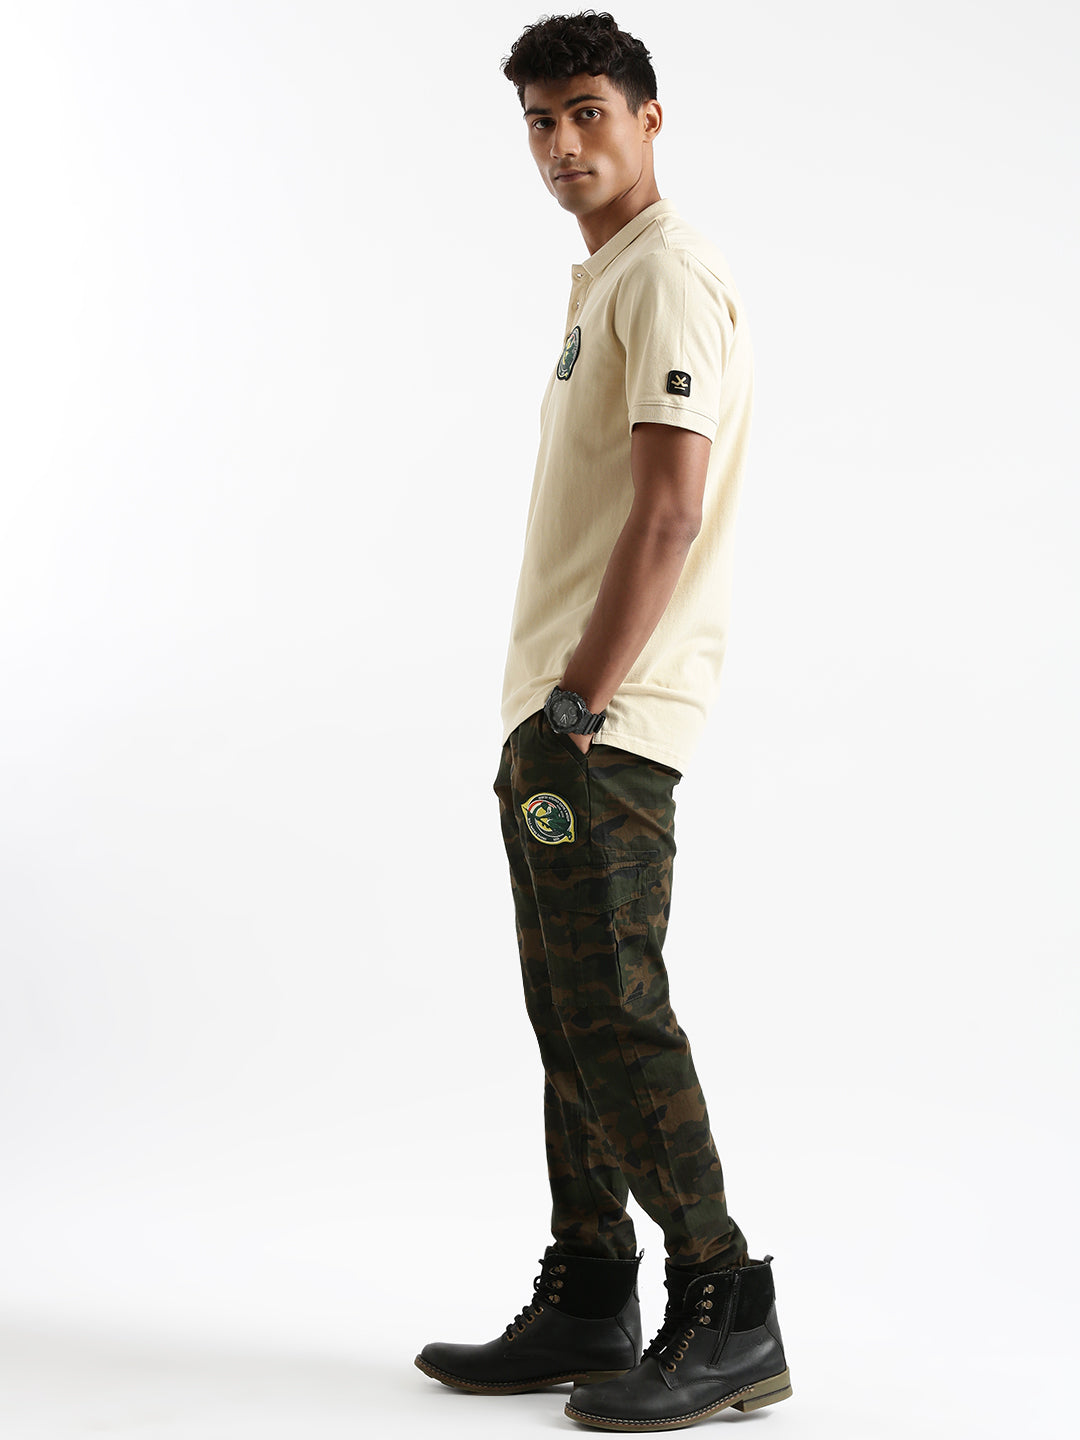 Indian Infantry By A47 Polo T-Shirt